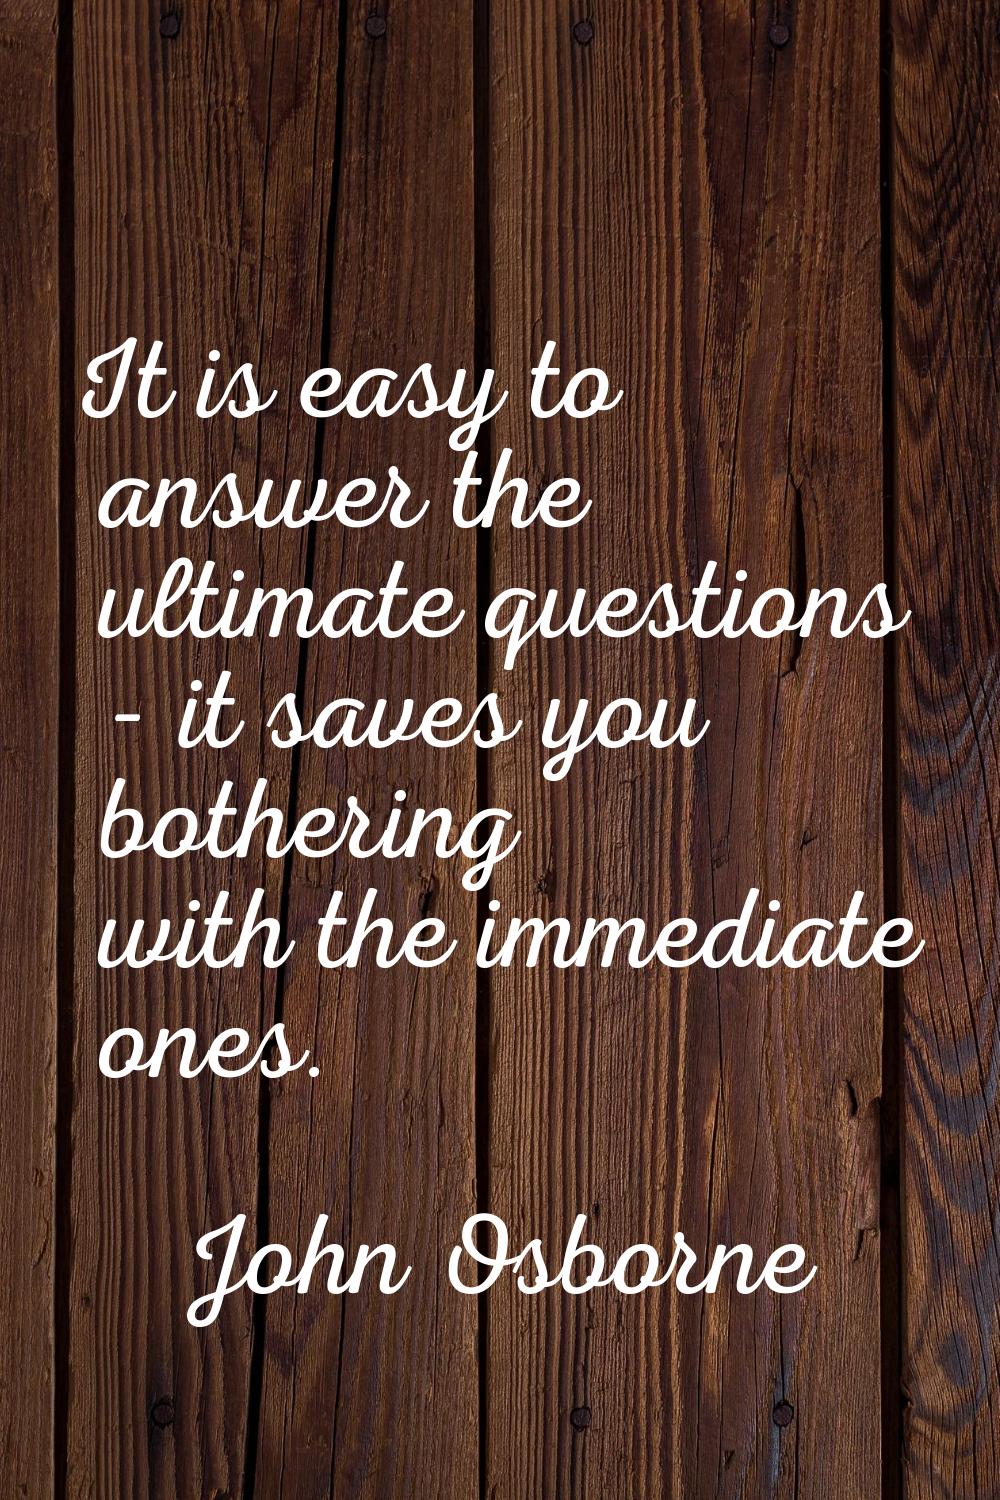 It is easy to answer the ultimate questions - it saves you bothering with the immediate ones.